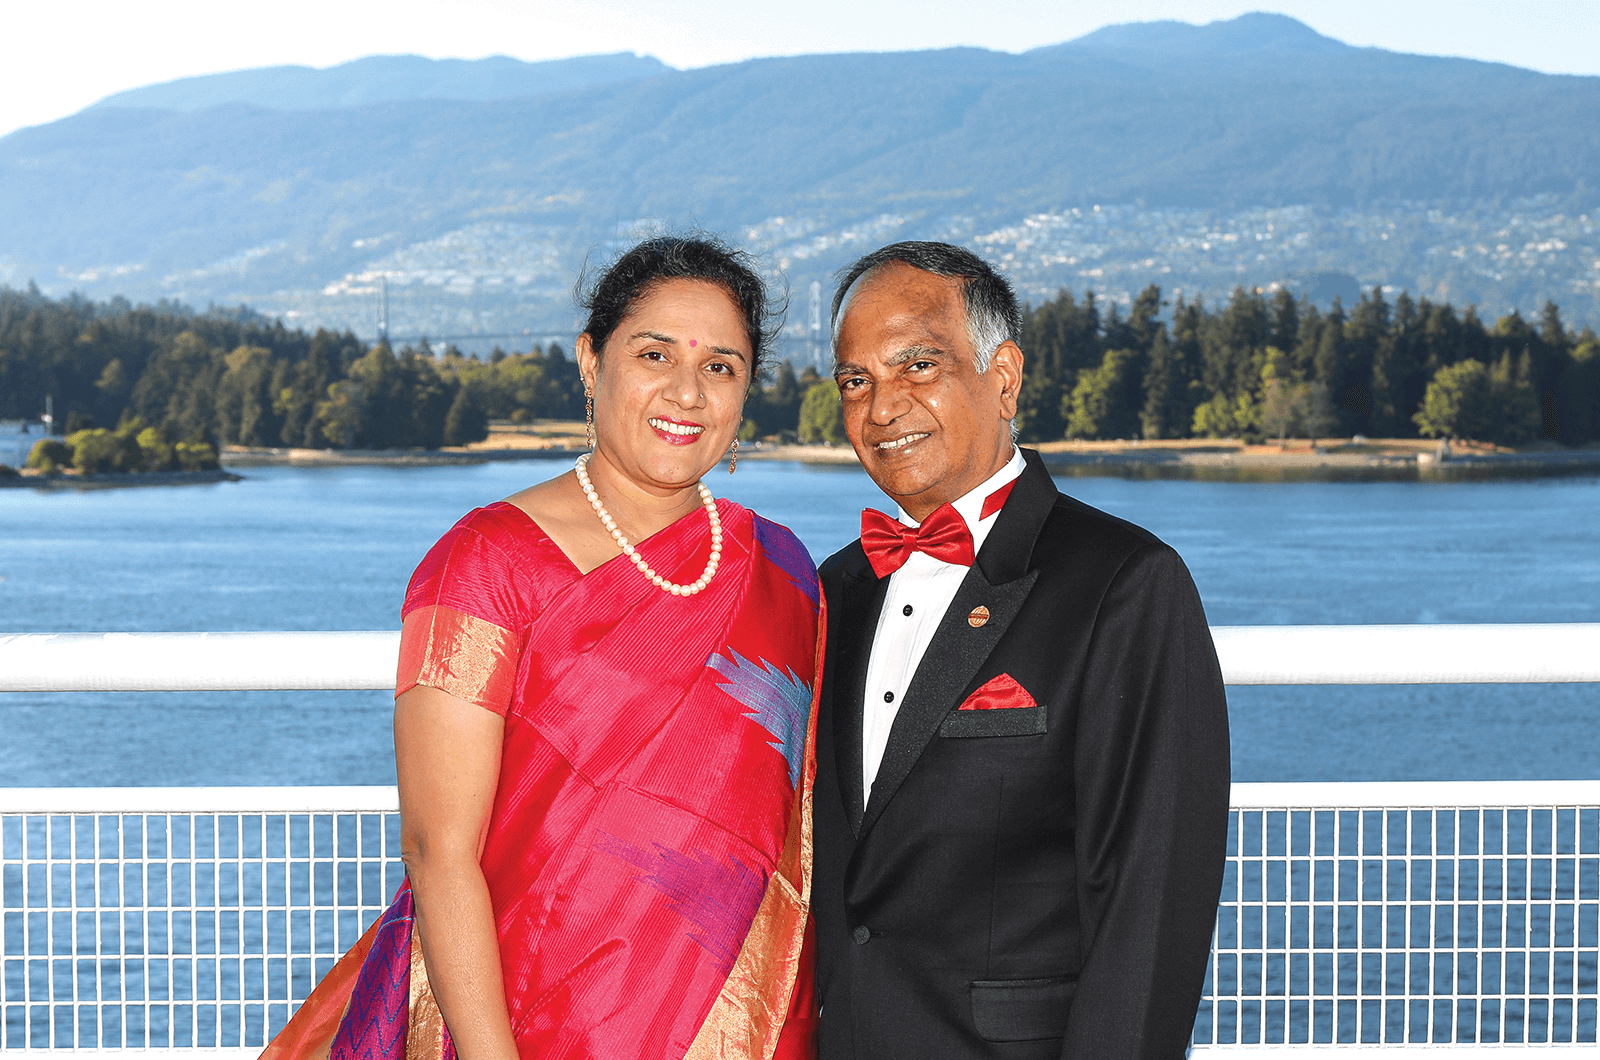 Menon and his wife, Kavita, attend the International Convention in Vancouver, Canada, in 2017.